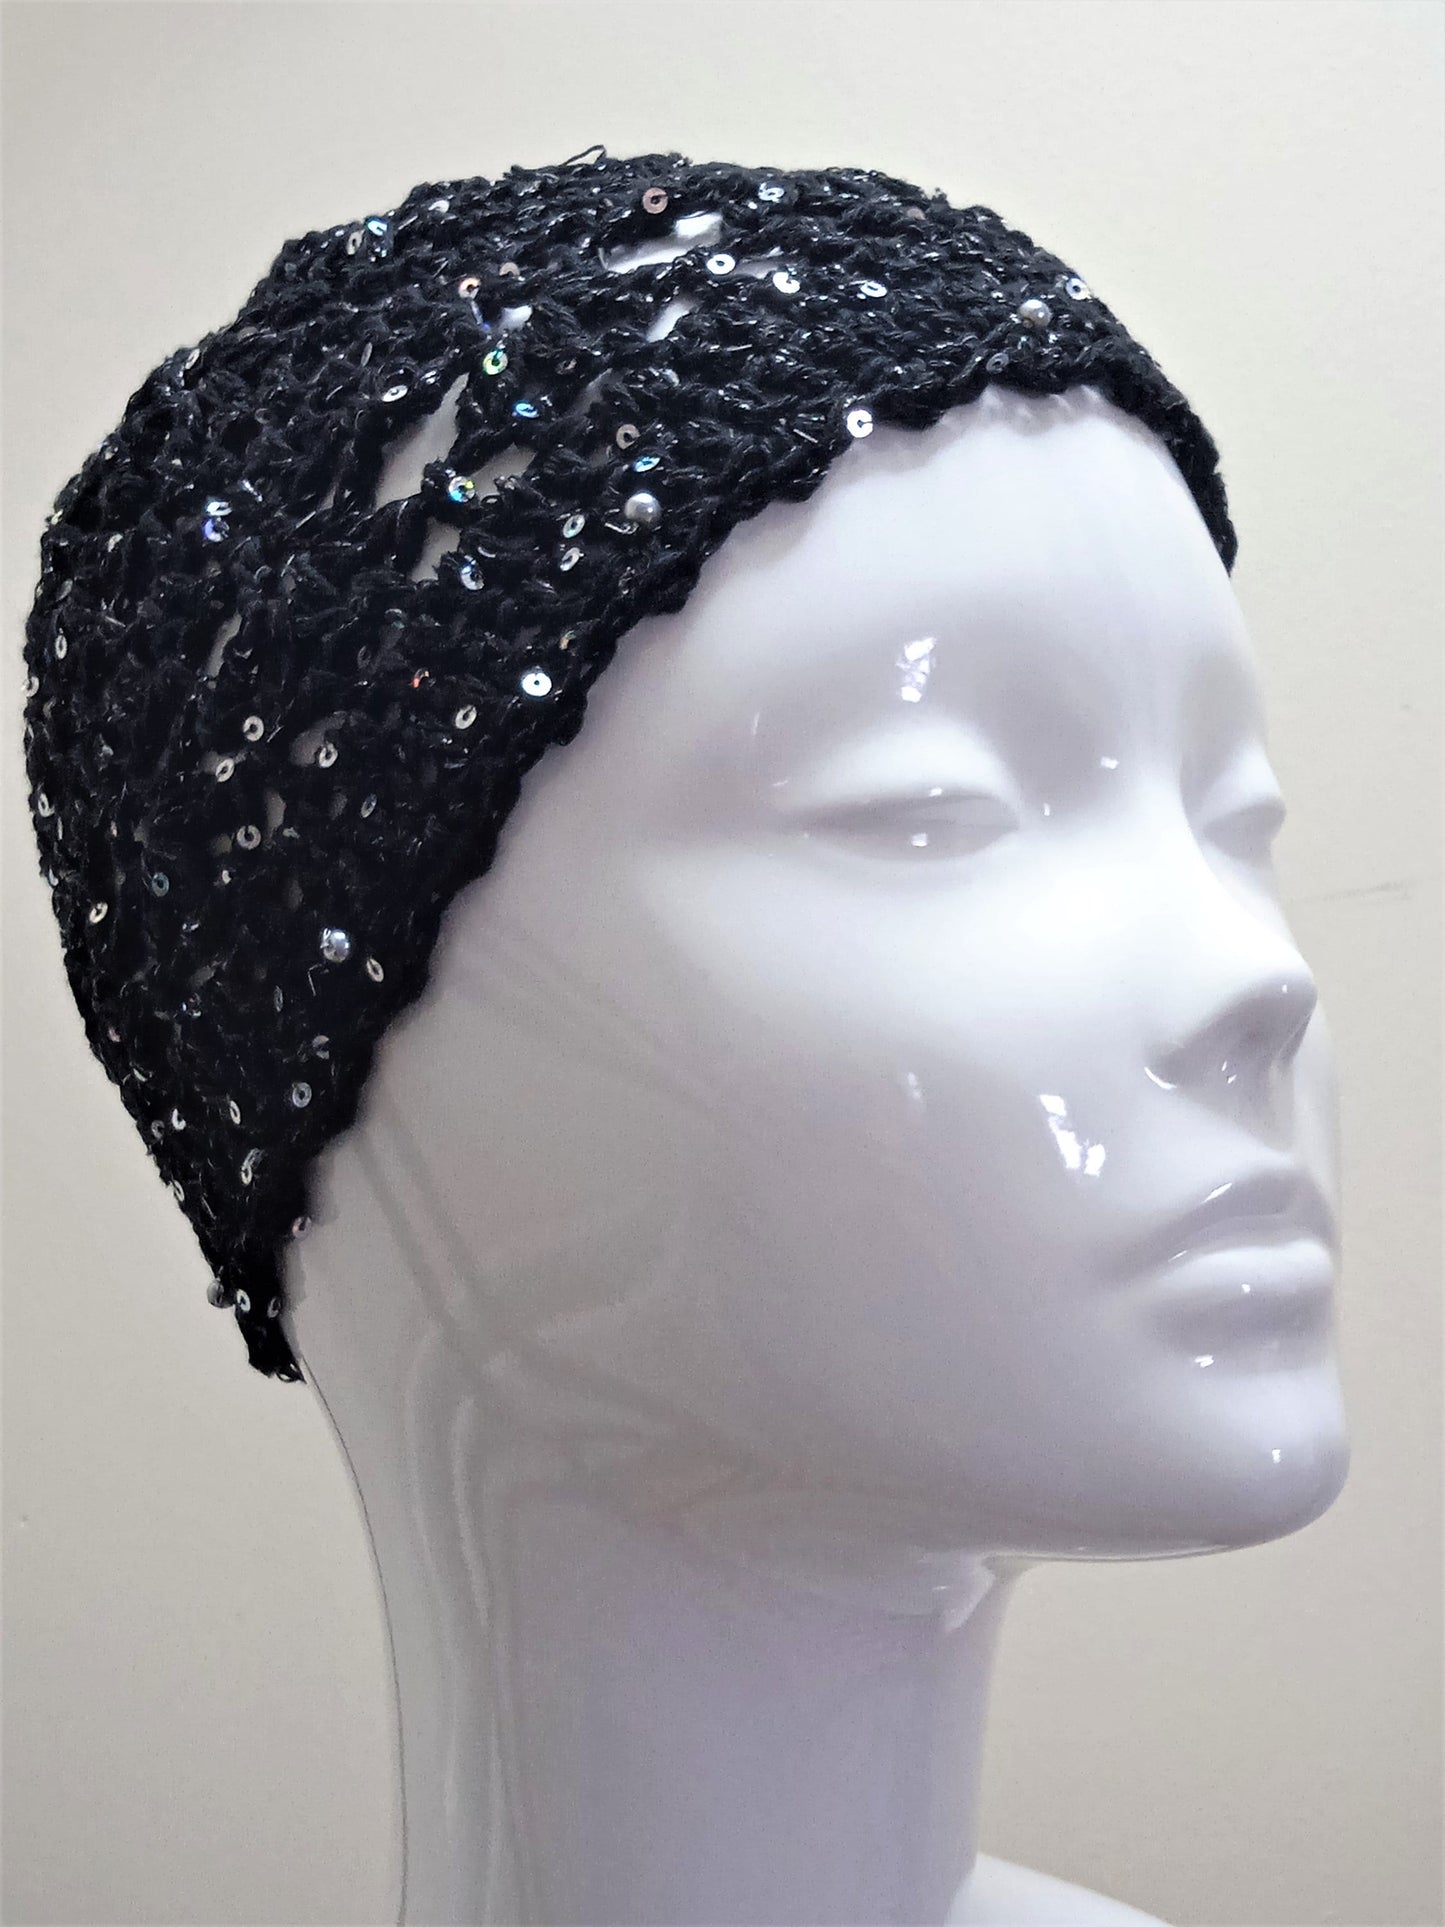 Crochet Black Skull Cap with Silver Sequins and Beads